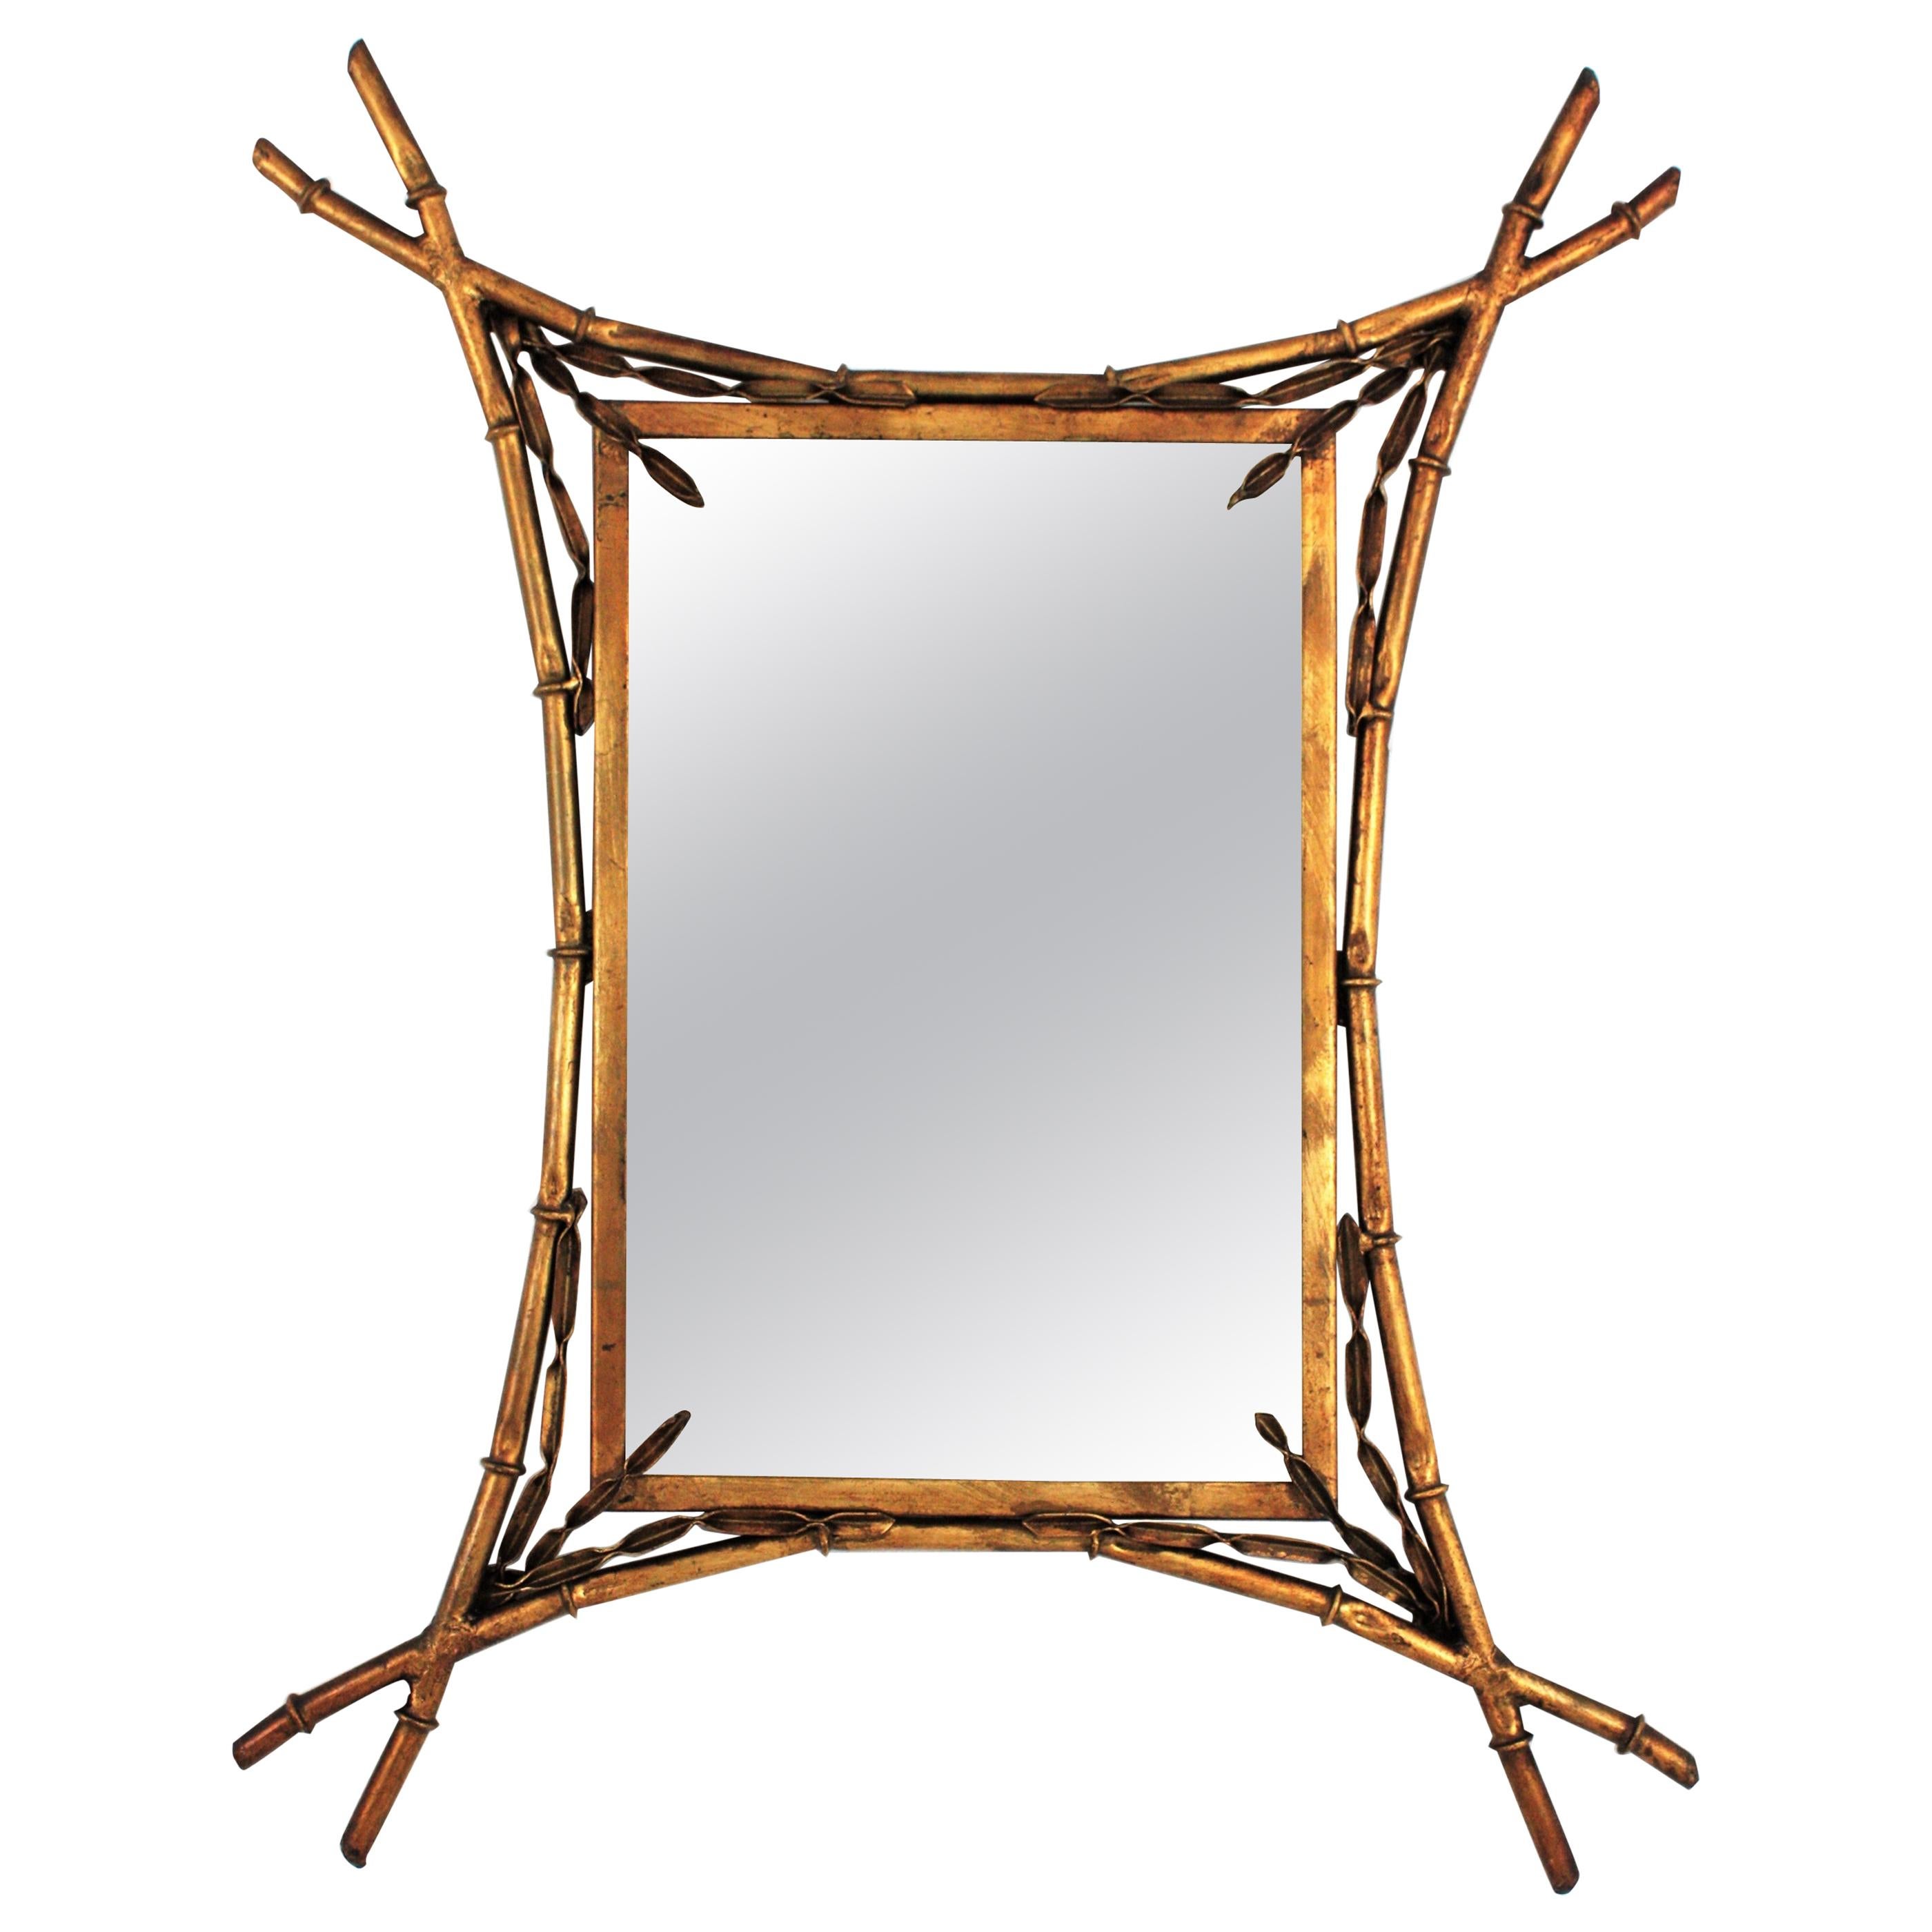 French Faux Bamboo Mirror in Gilt Metal, Maison Baguès Style